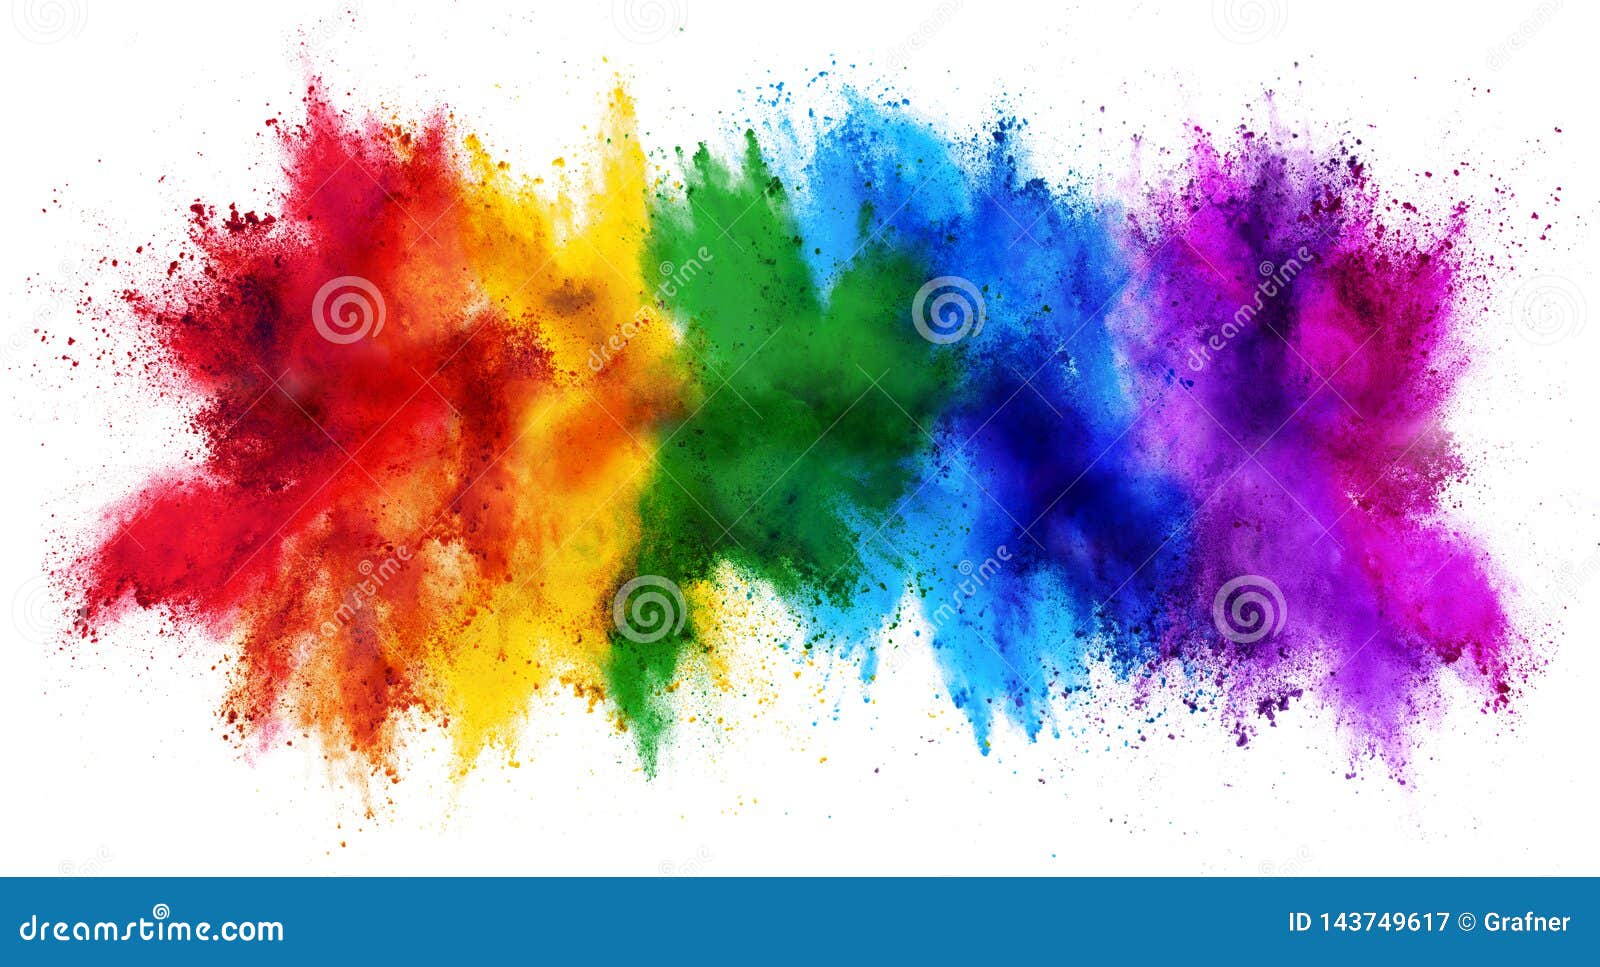 193882 Holi Background Images Stock Photos  Vectors  Shutterstock